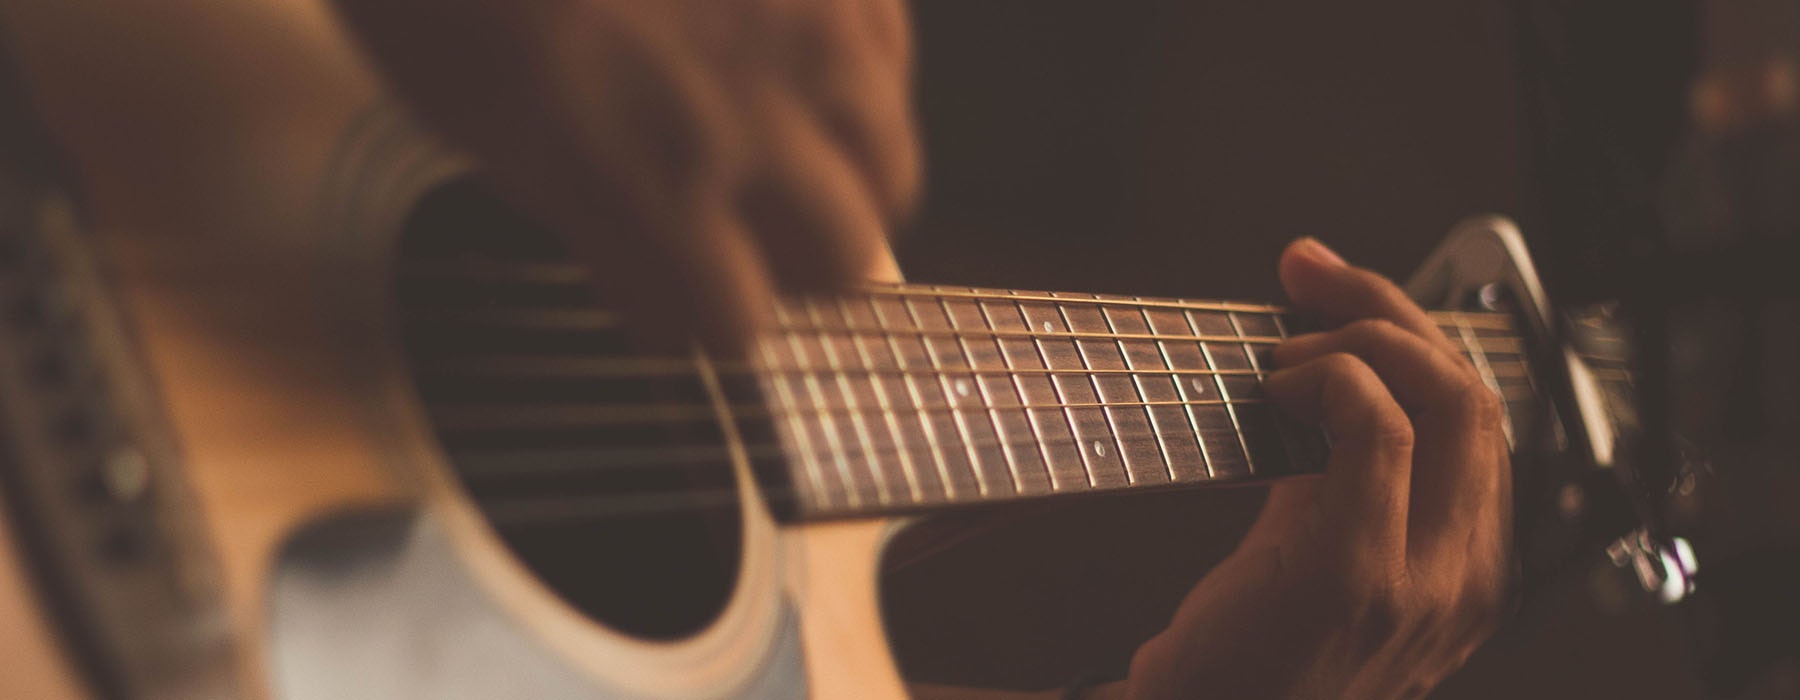 Close up of a person playing the guitar